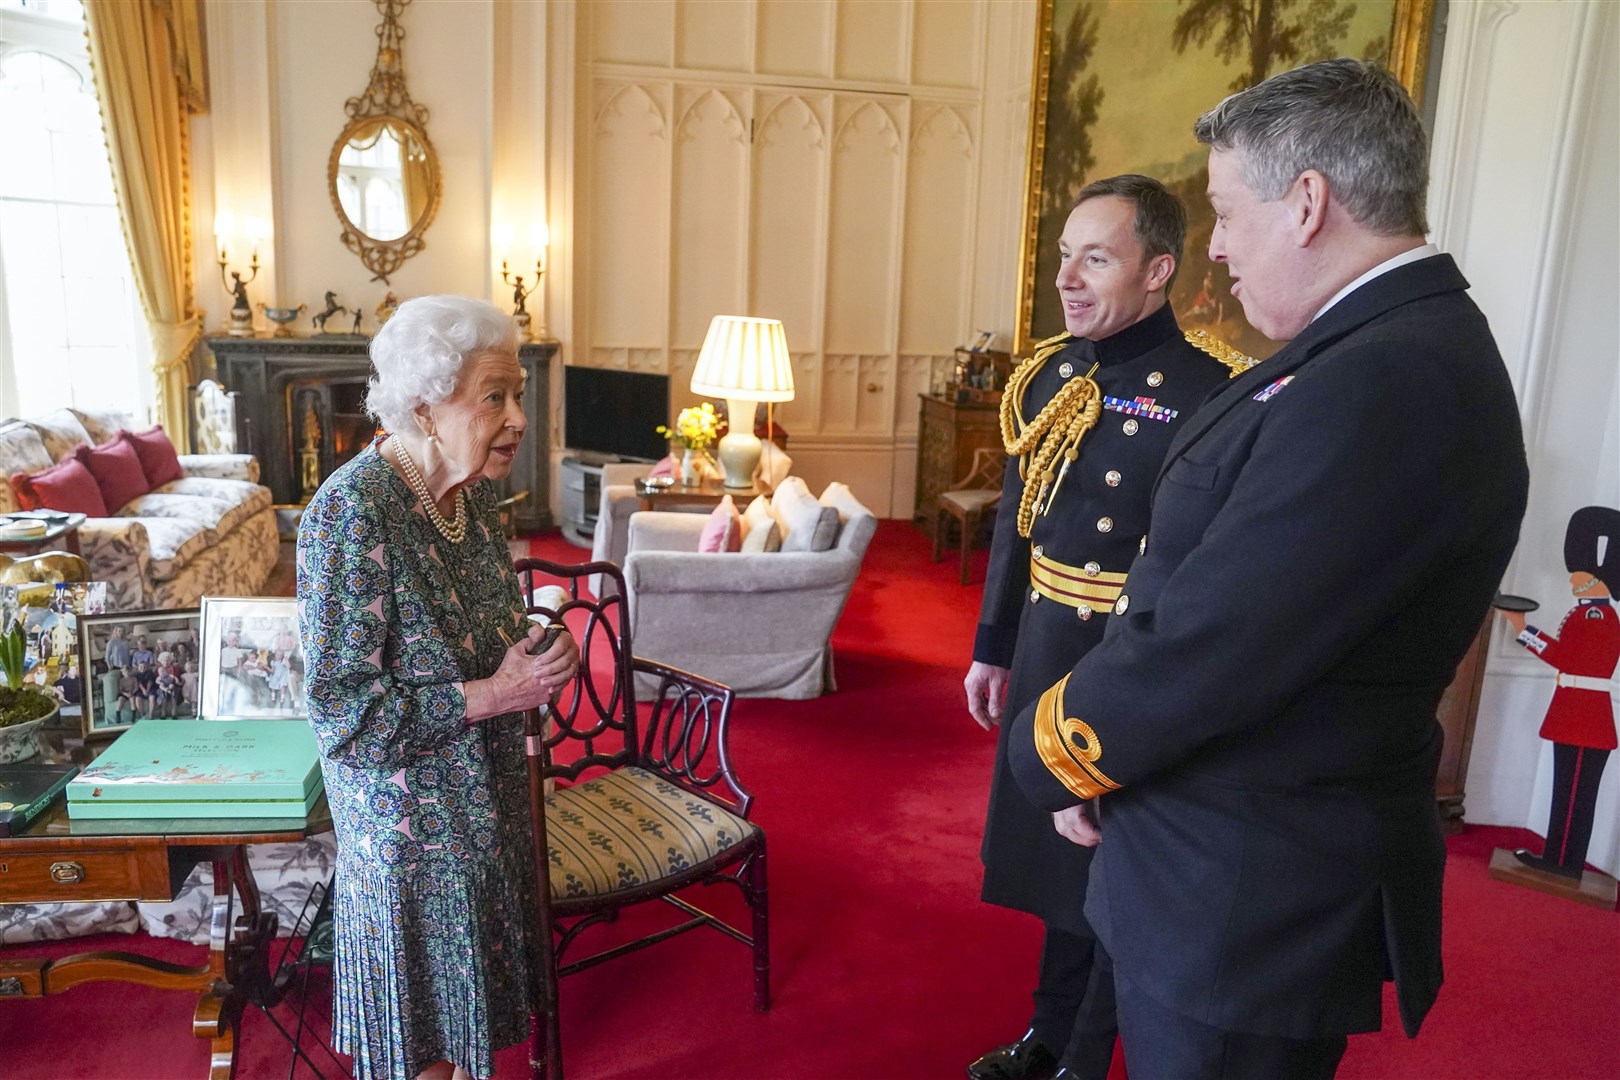 The Queen with Rear Admiral James Macleod and Major General Eldon Millar at an audience in February (Steve Parsons/PA)